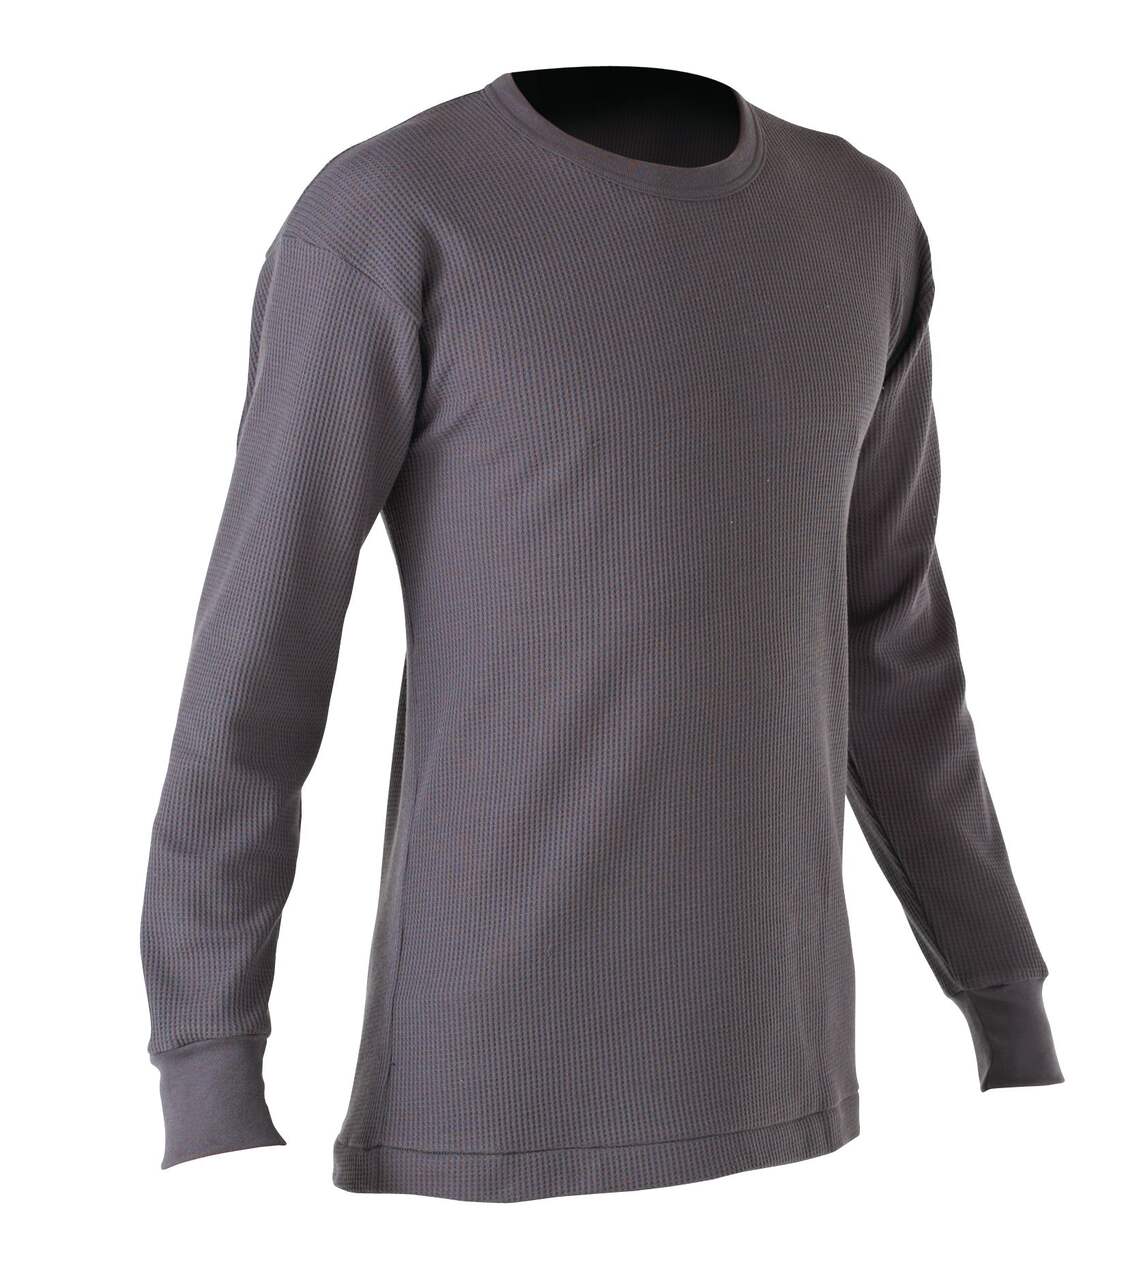 https://media-www.canadiantire.ca/product/playing/footwear-apparel/winter-footwear-apparel/0871904/men-s-thermal-top-small-misty-mountain-bb89f0cf-cc56-48de-902a-a98a356387d6-jpgrendition.jpg?imdensity=1&imwidth=640&impolicy=mZoom